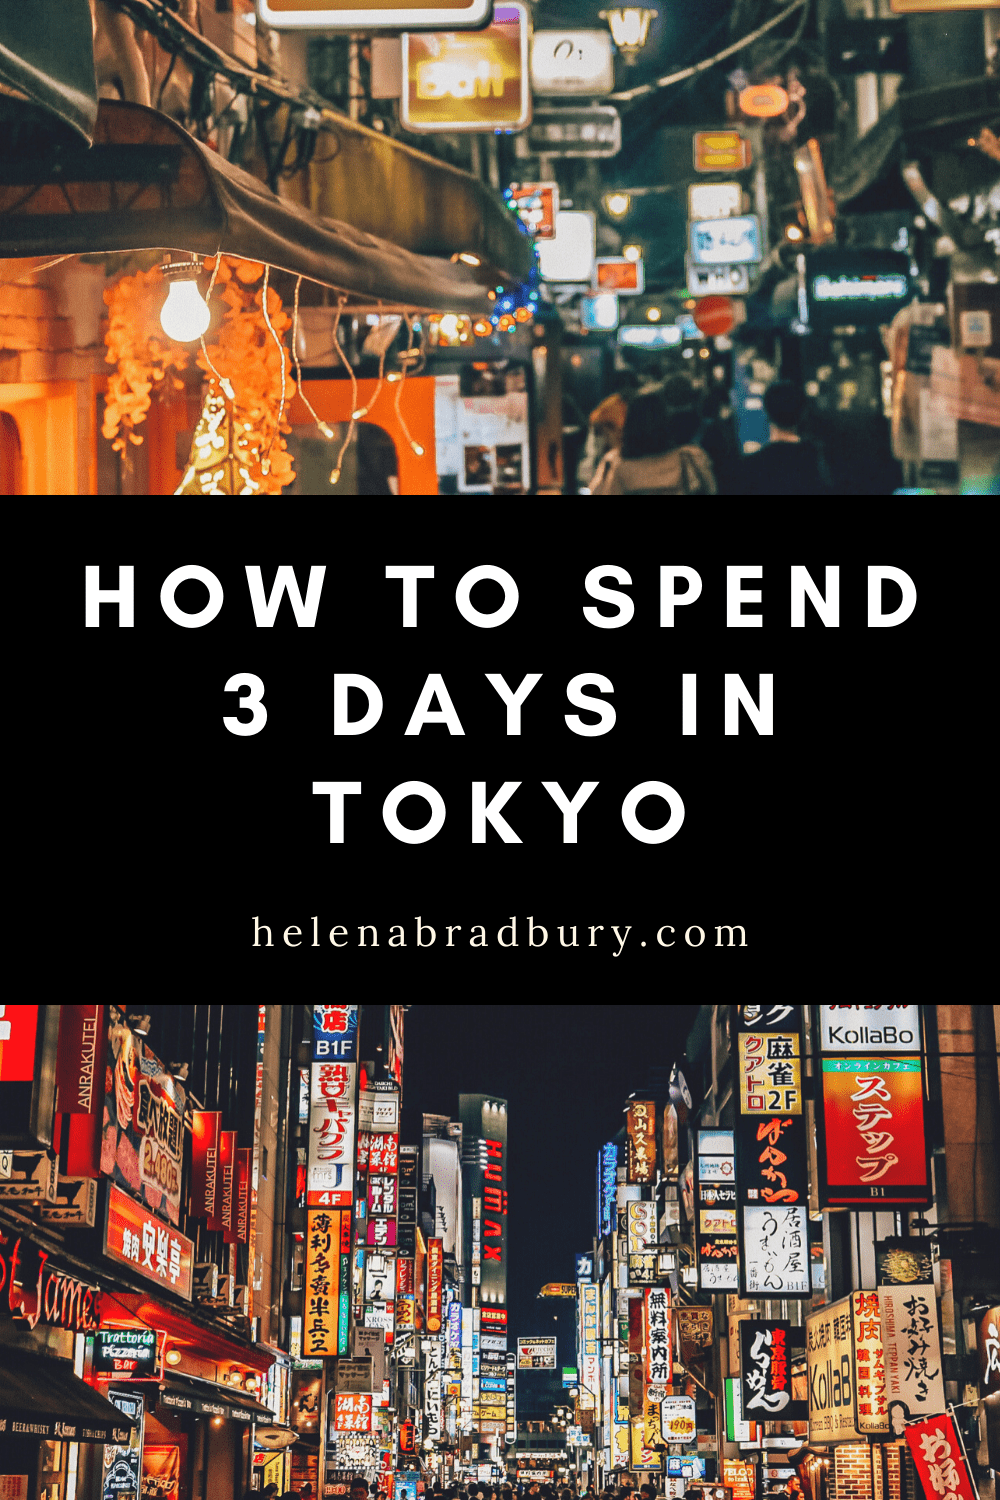 72 hours in Tokyo, Japan on a budget